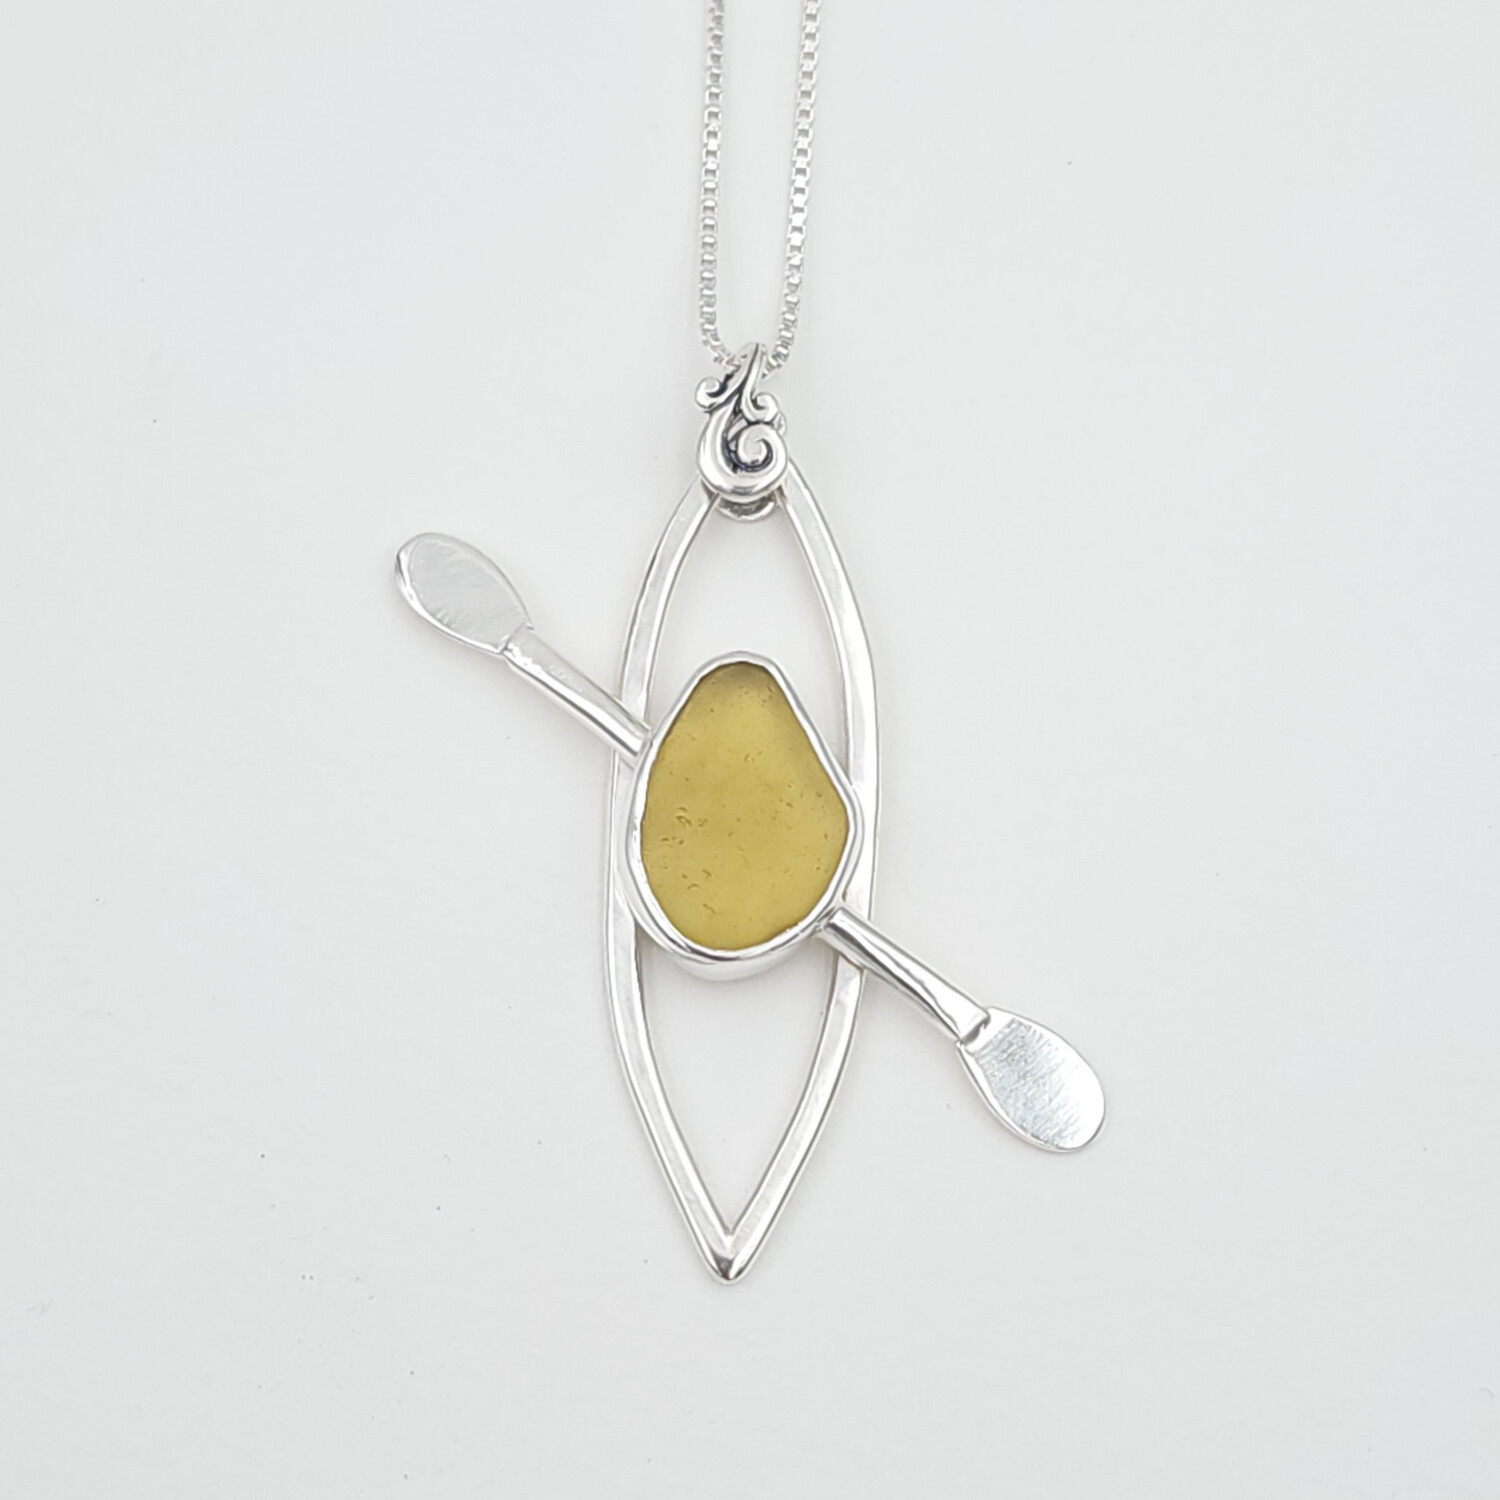 RESERVED: Yellow Lake Erie Beach Glass Kayak Necklace